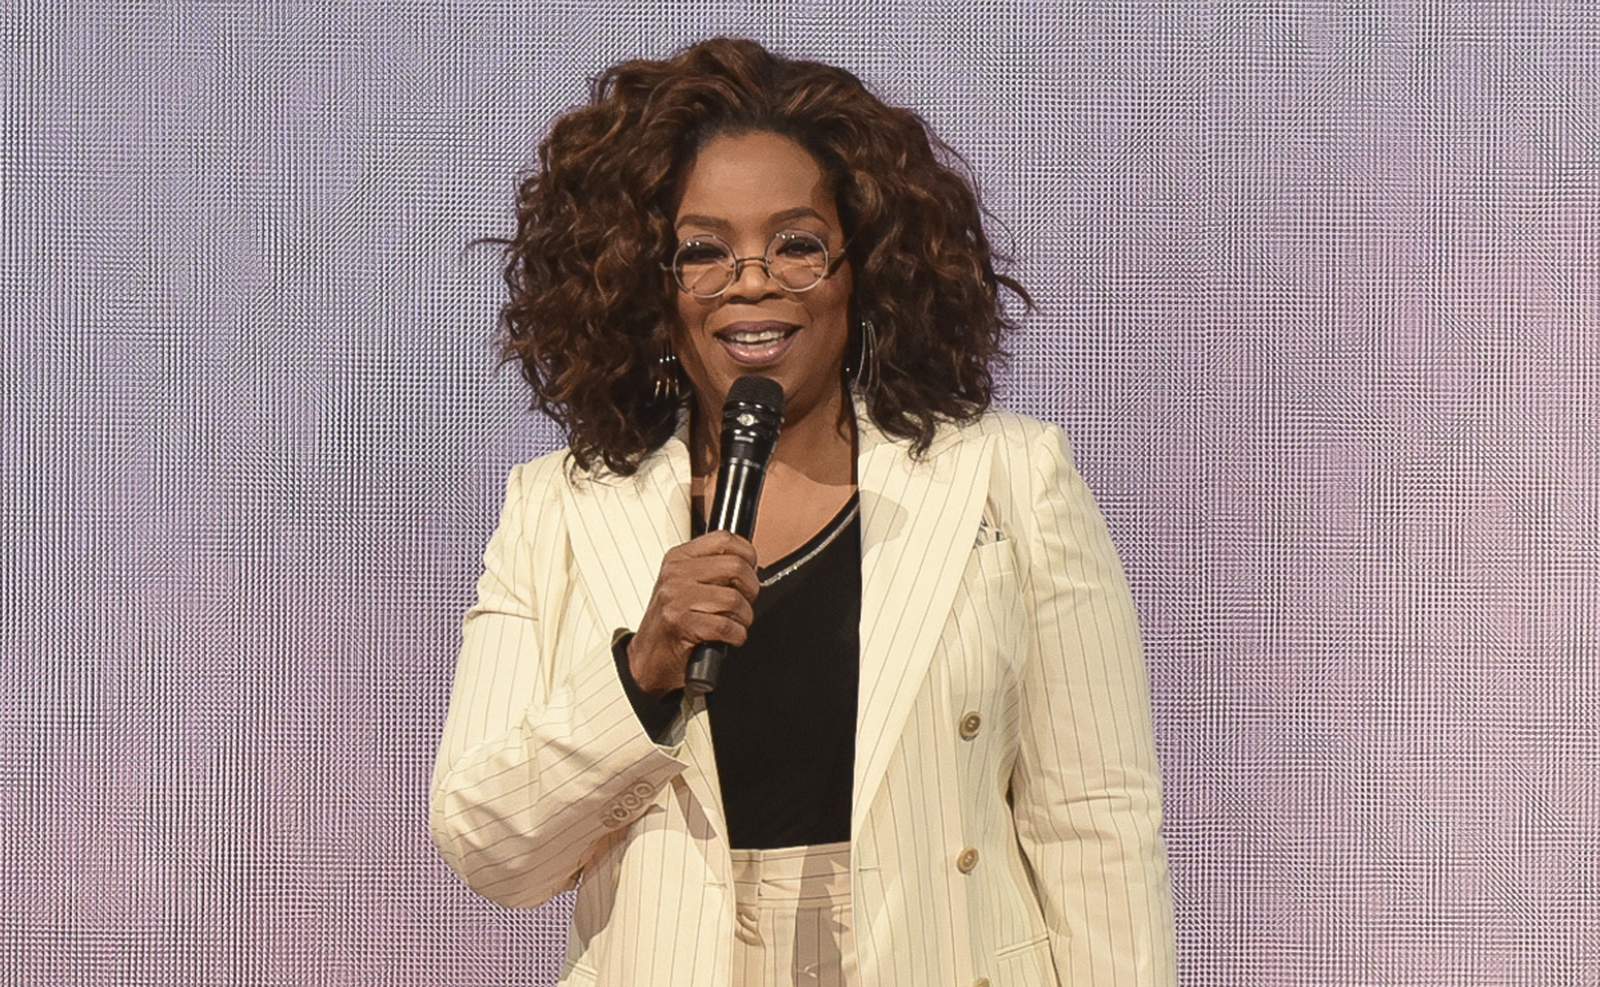 Here’s how to attend free virtual wellness event on self-love with Oprah